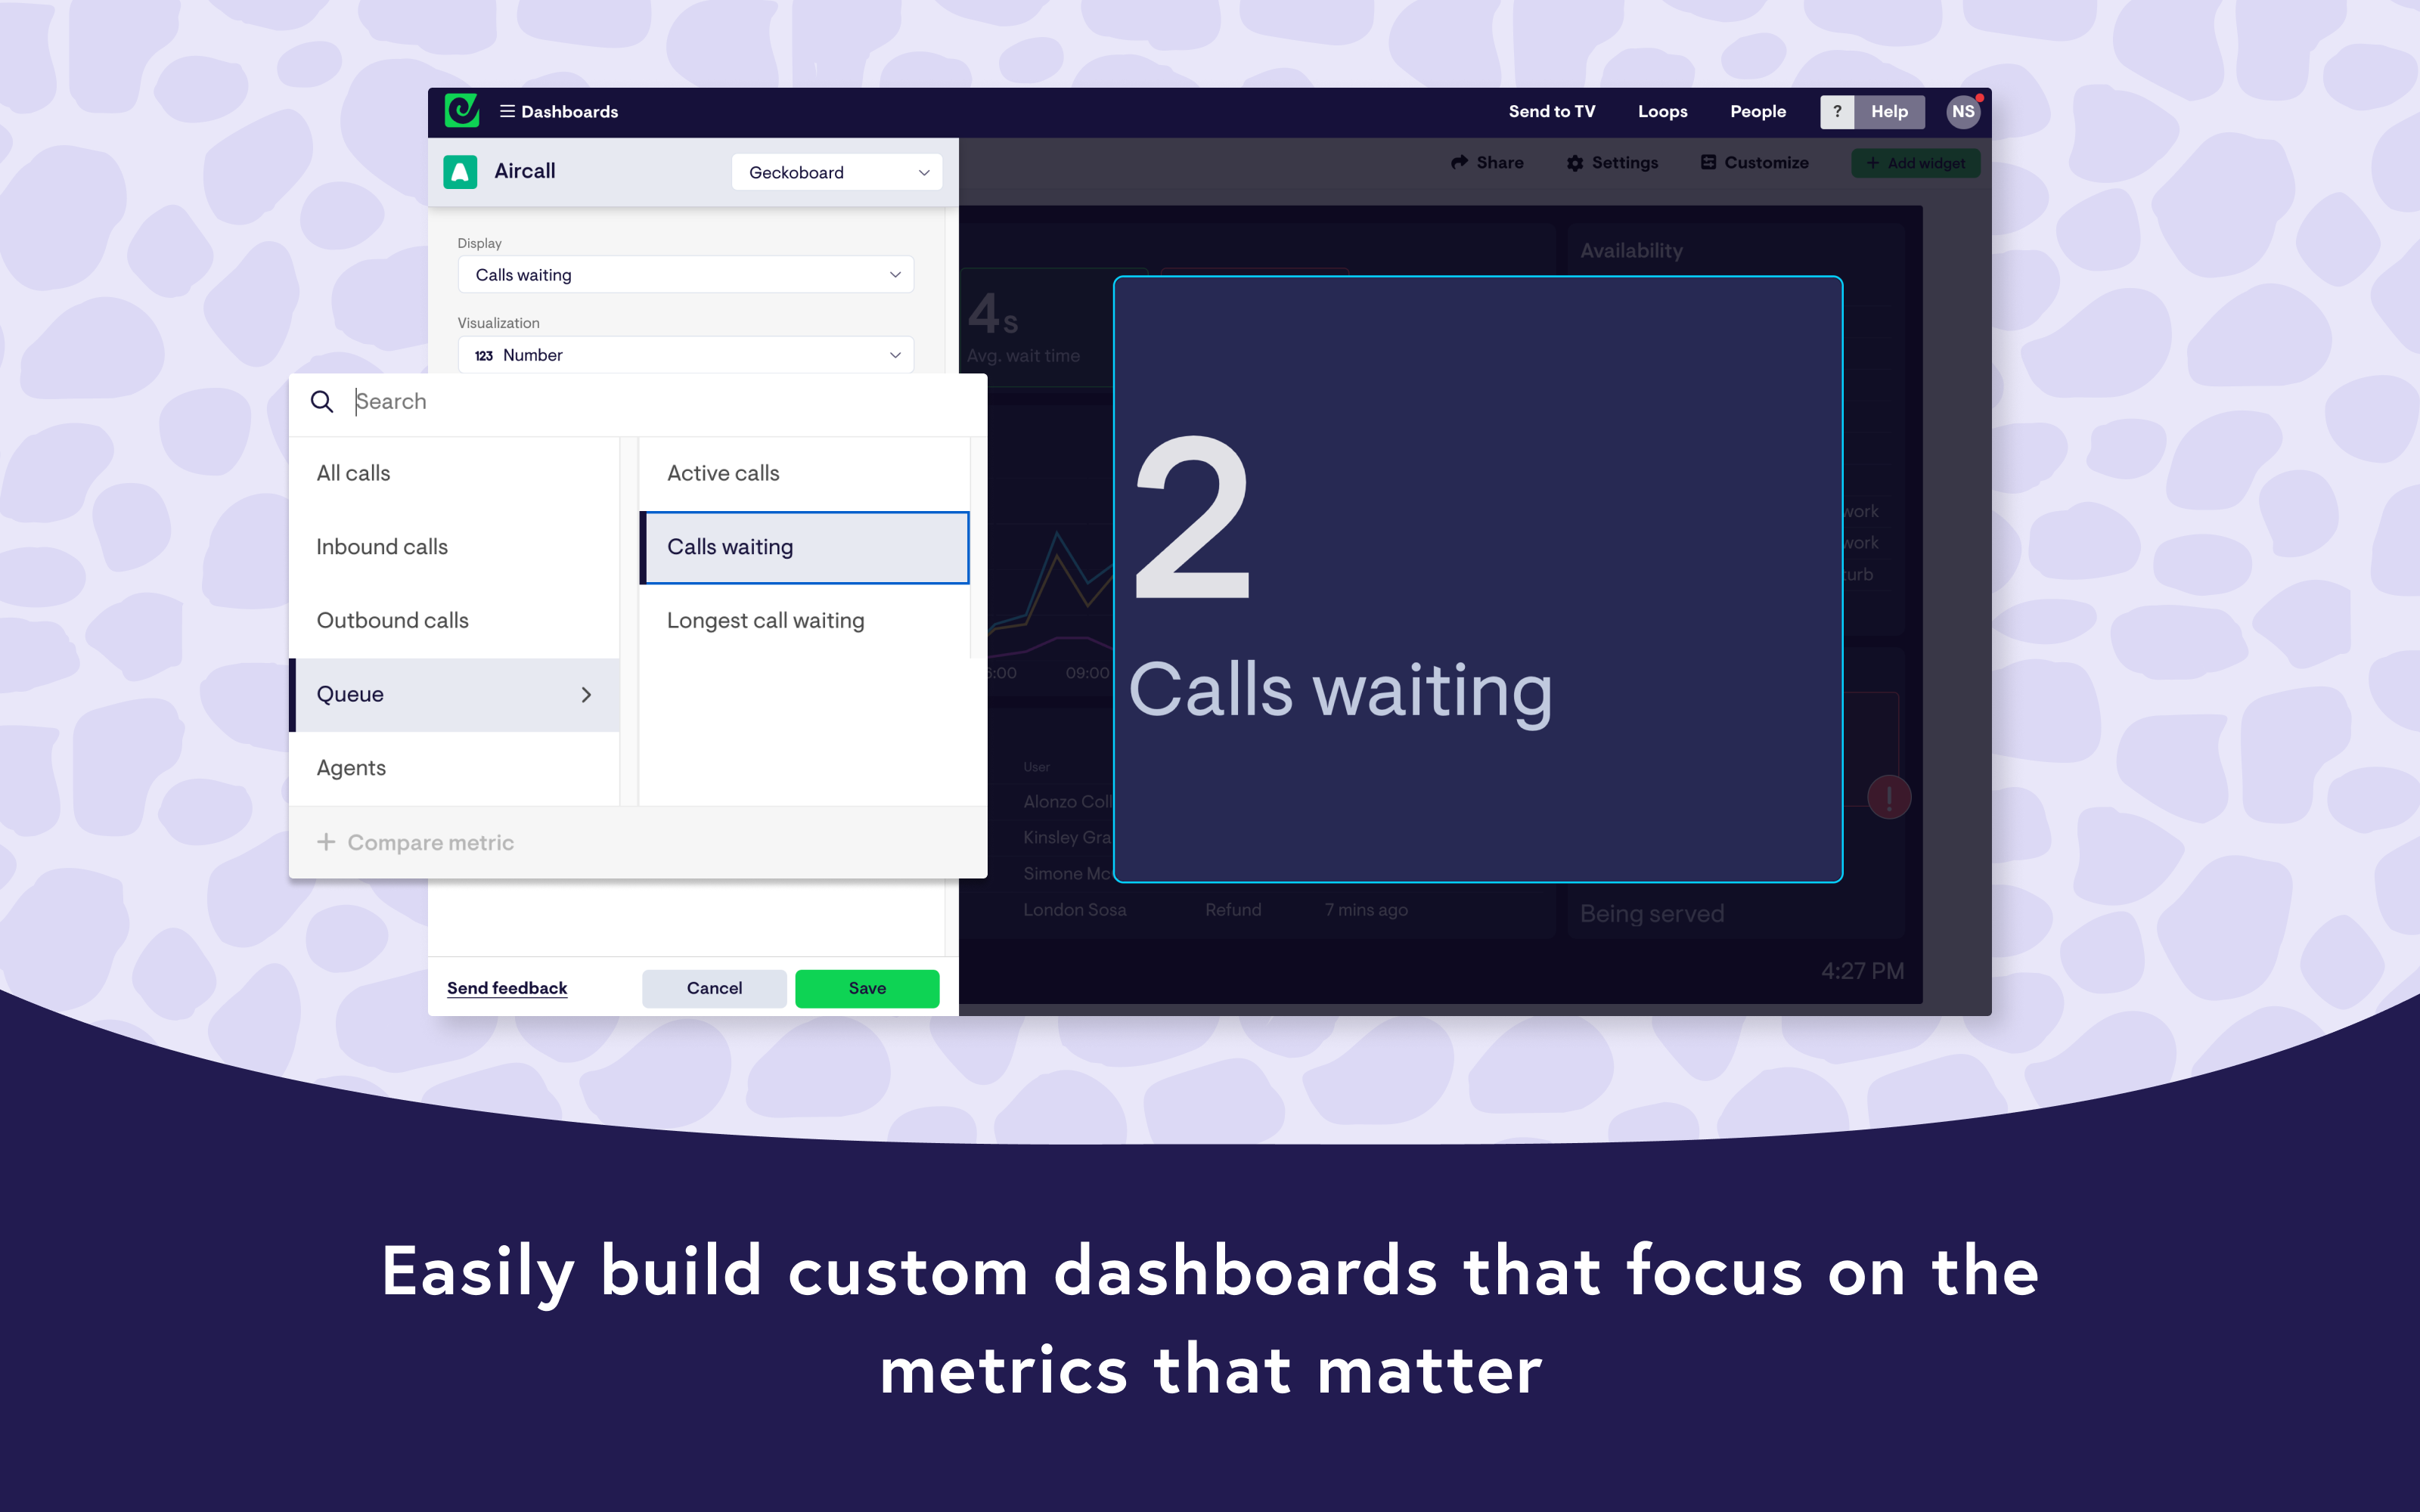 Easily build custom dashboards that focus on the metrics that matter